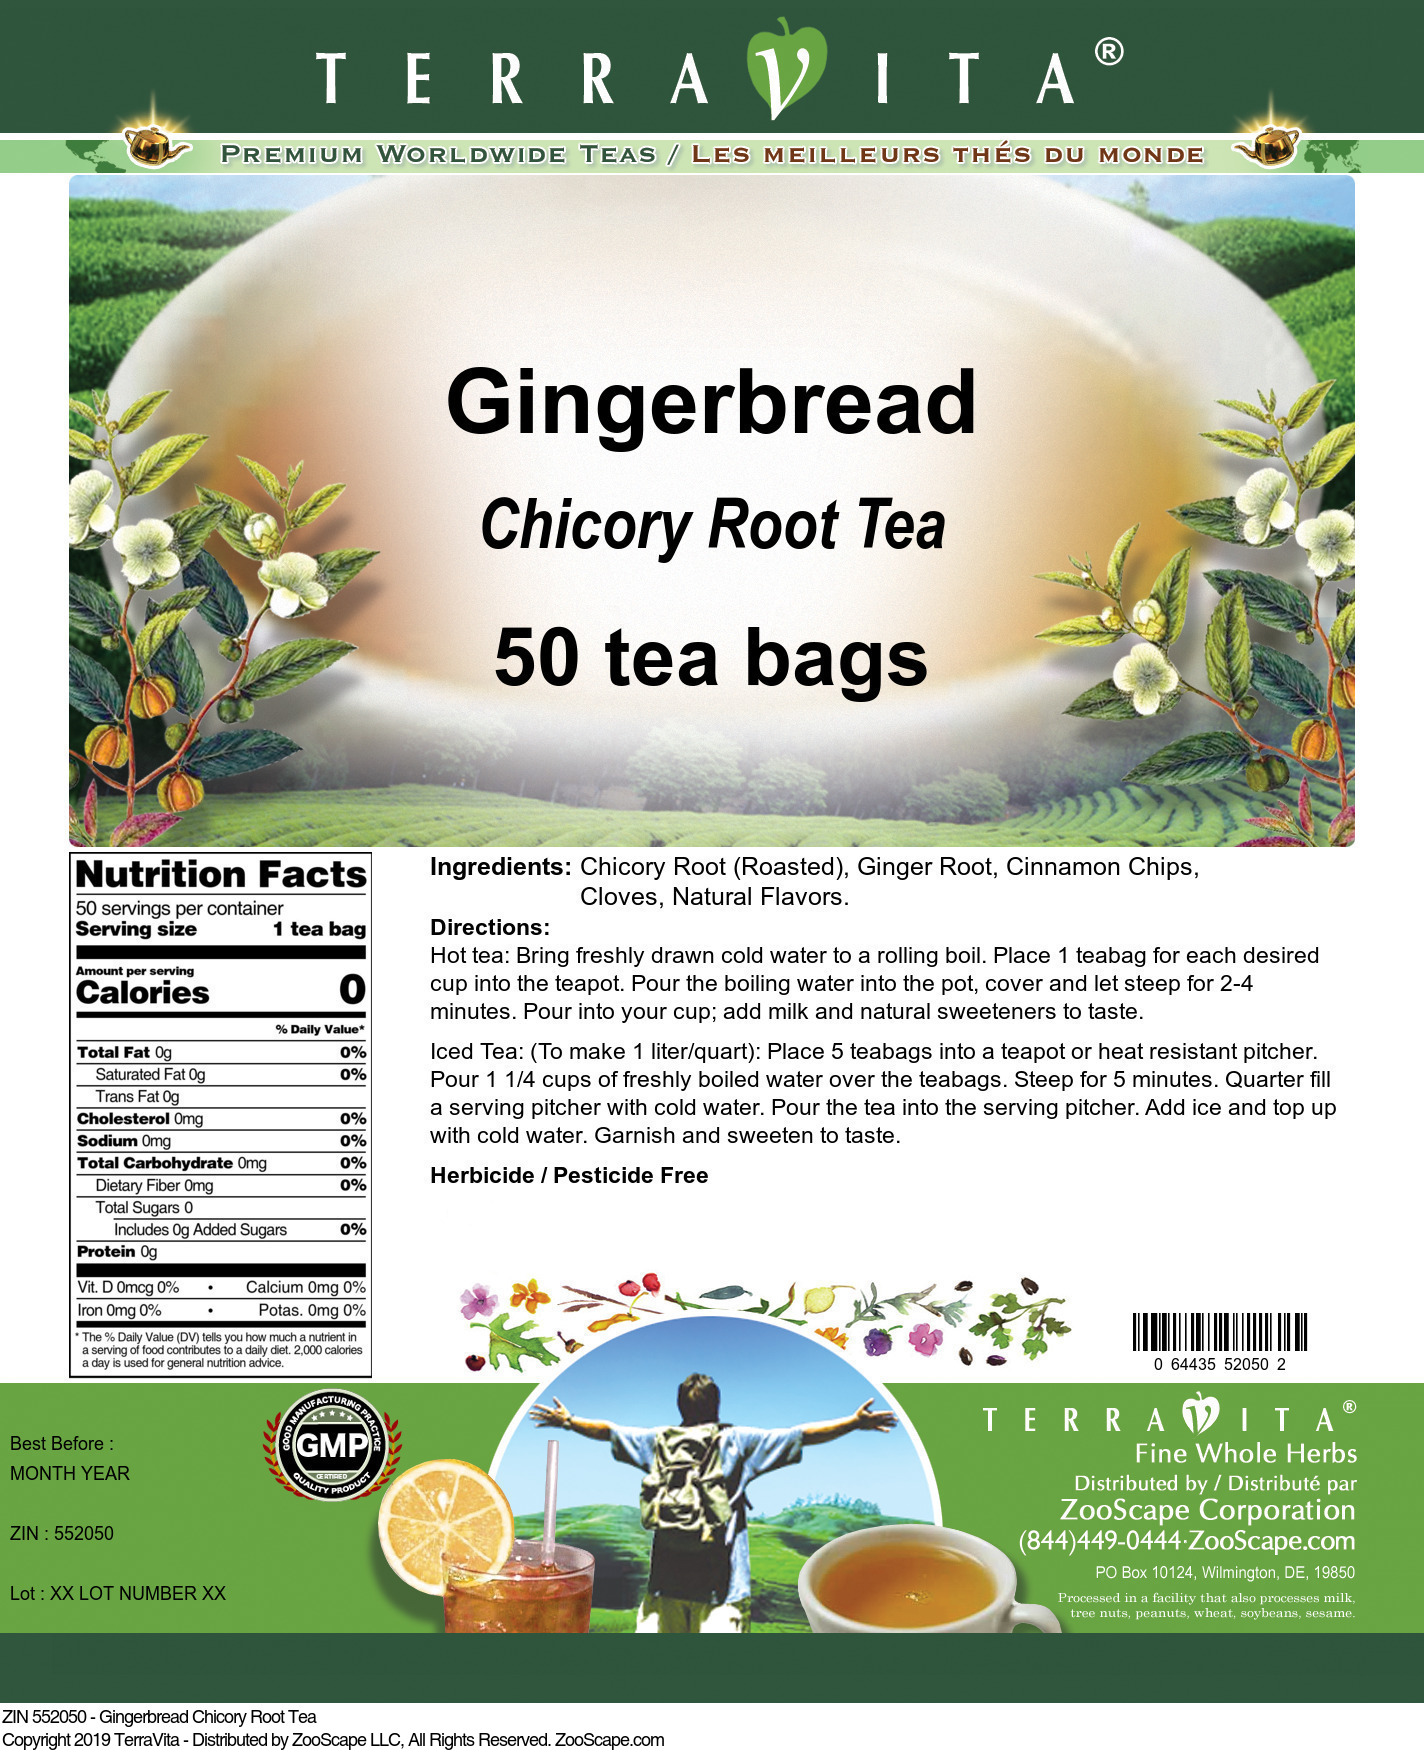 Gingerbread Chicory Root Tea - Label